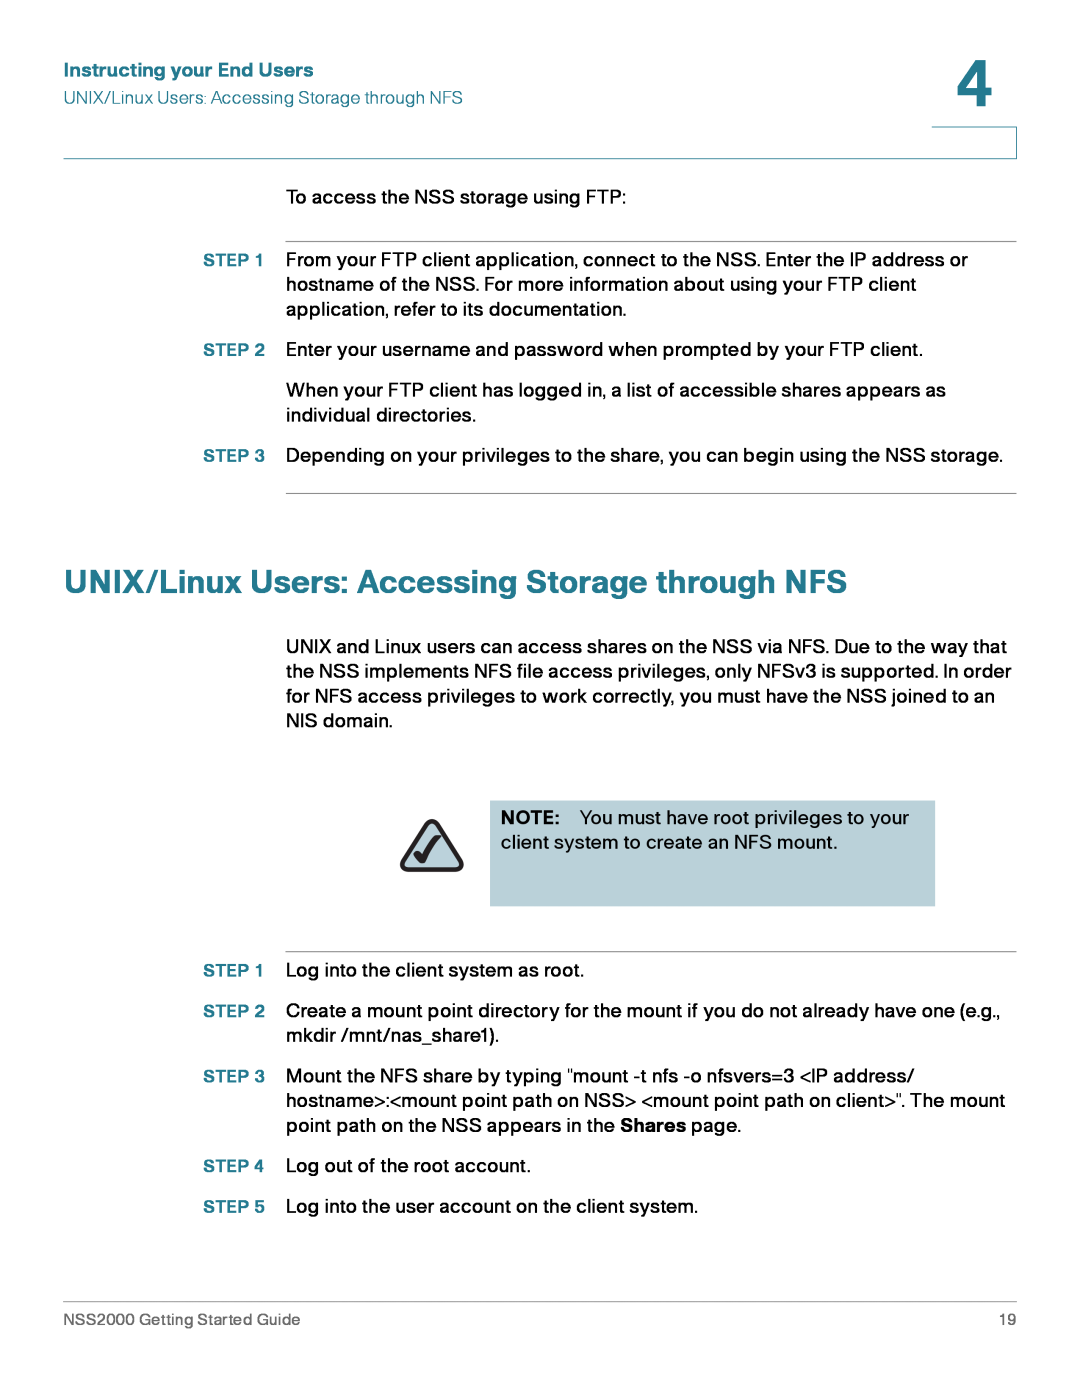 Cisco Systems NSS2000 Series manual UNIX/Linux Users Accessing Storage through NFS, Instructing your End Users 